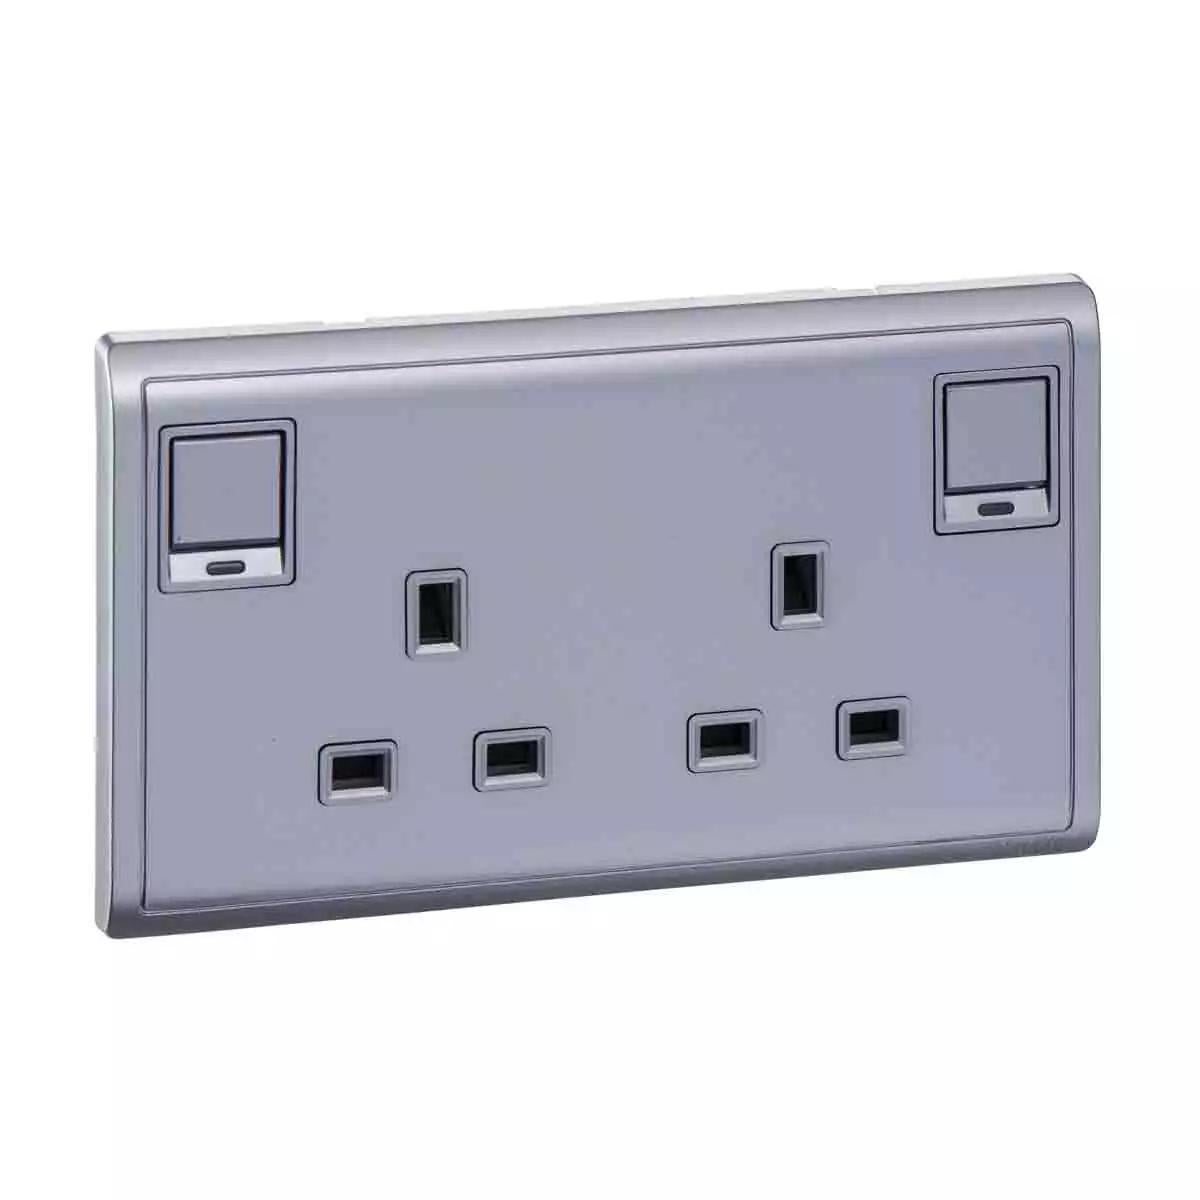 Pieno 13A 250V Twin Switched Socket with Neon Lavender Silver